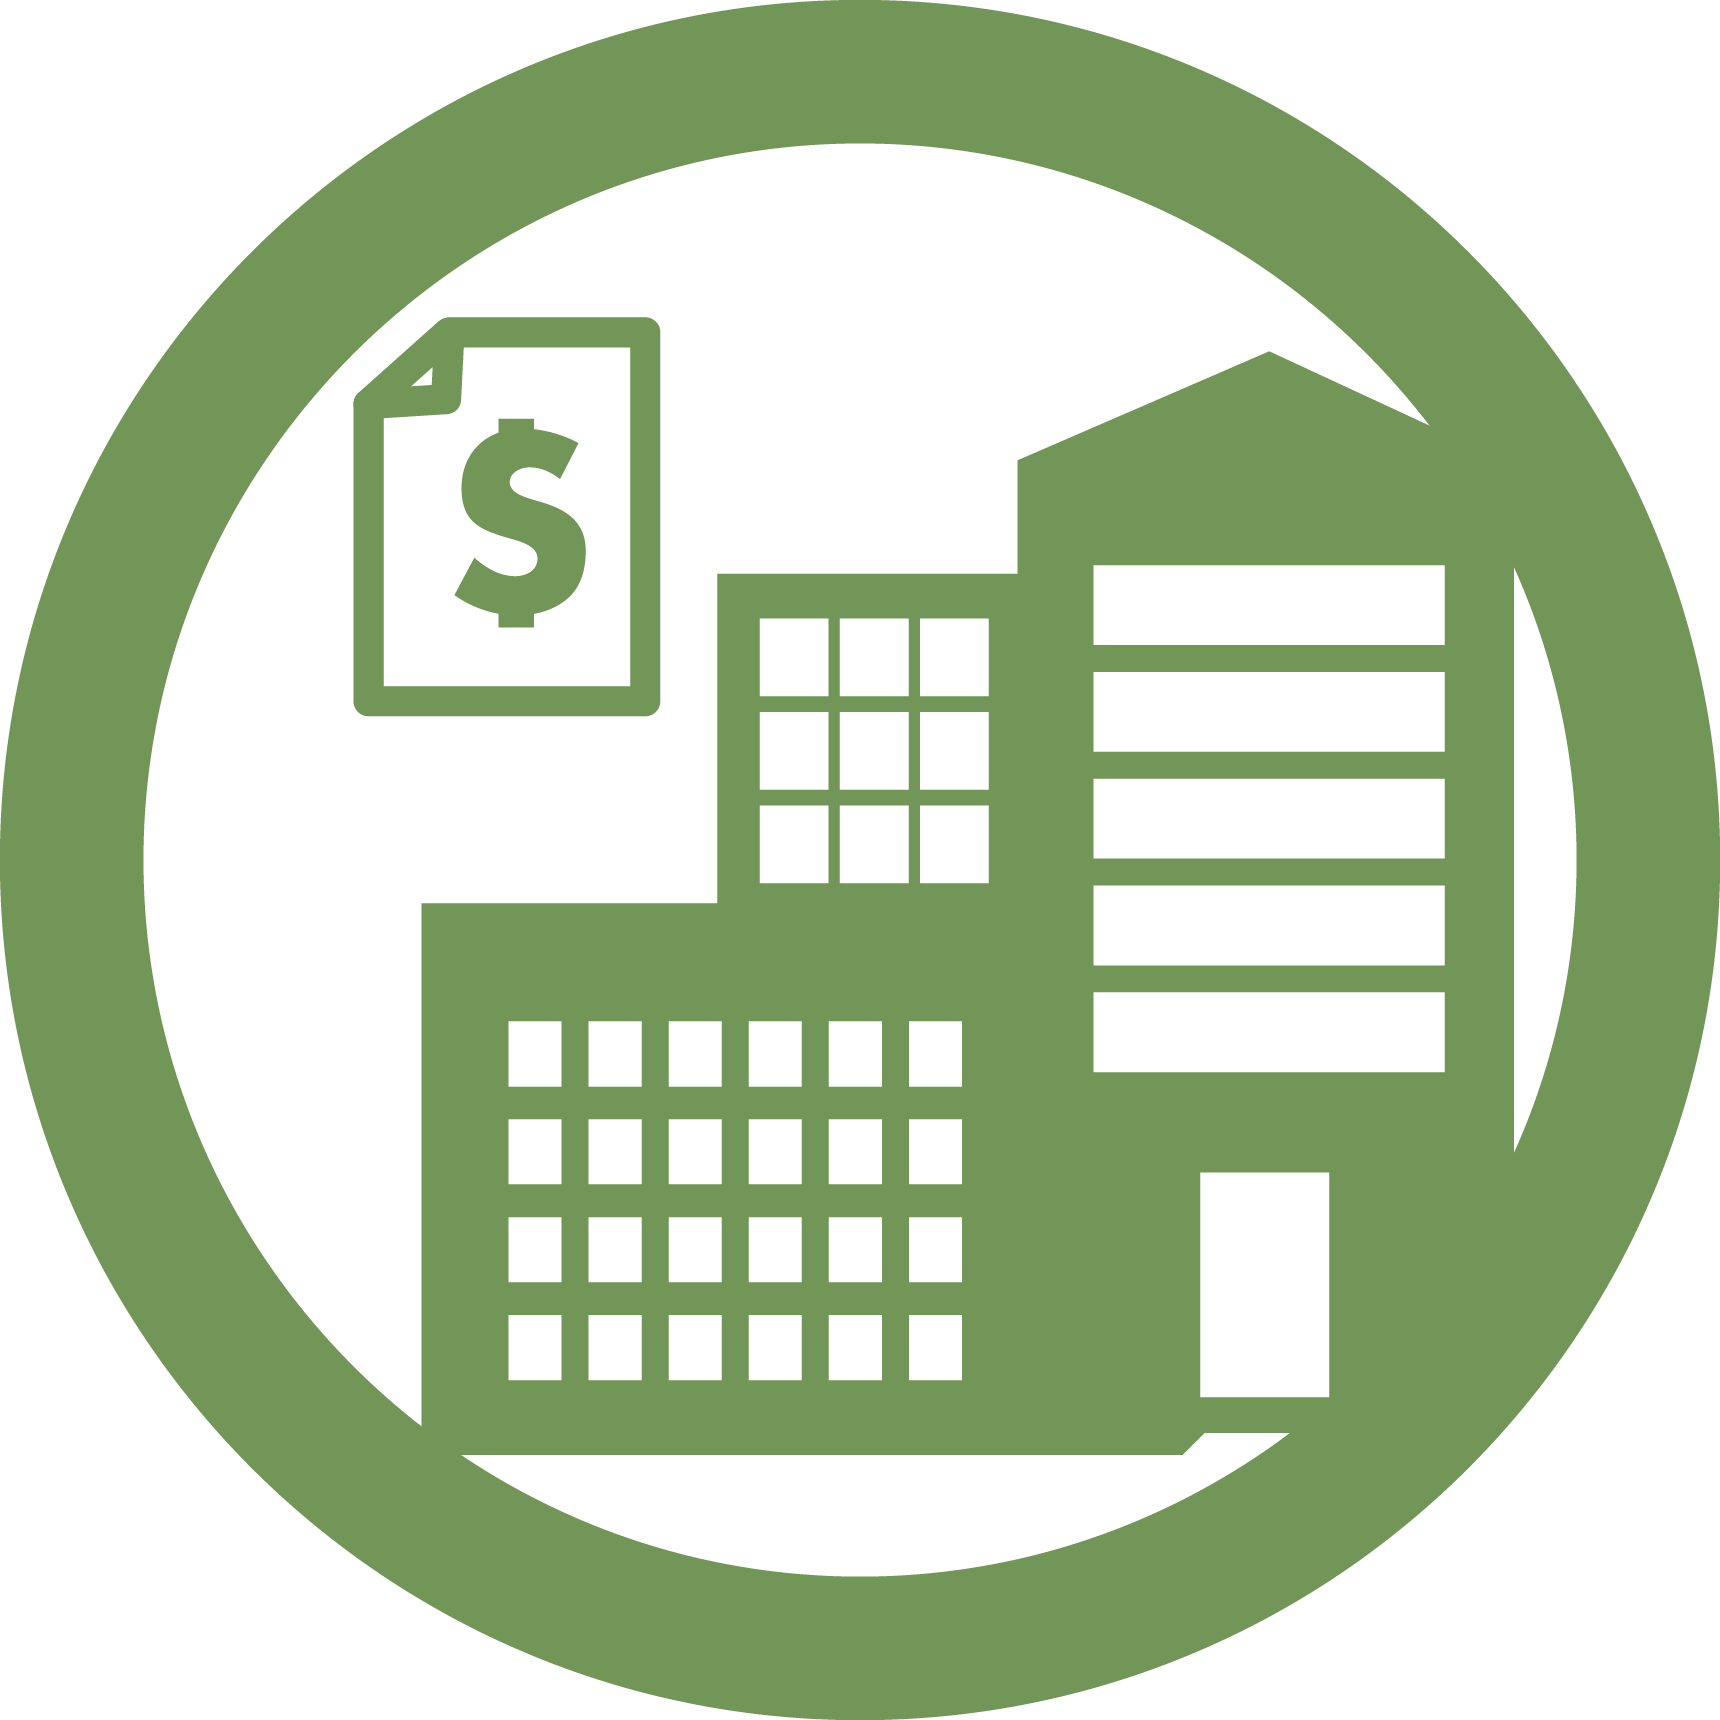 Competitive Task Force Logo - Green buildings and a spreadsheet enclosed by a green circle.